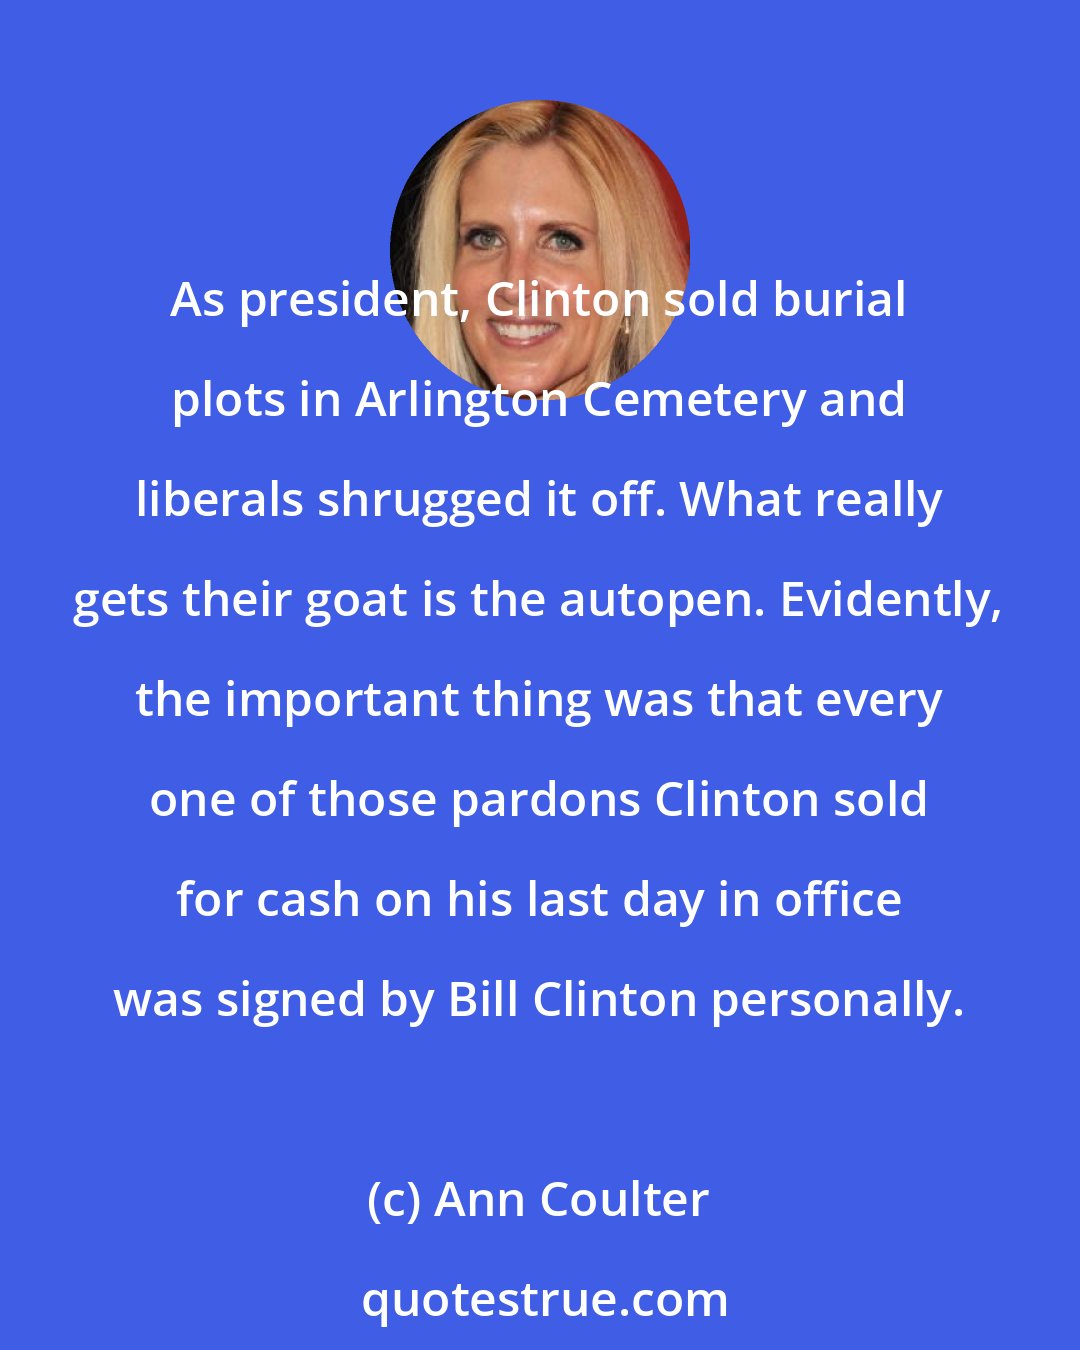 Ann Coulter: As president, Clinton sold burial plots in Arlington Cemetery and liberals shrugged it off. What really gets their goat is the autopen. Evidently, the important thing was that every one of those pardons Clinton sold for cash on his last day in office was signed by Bill Clinton personally.